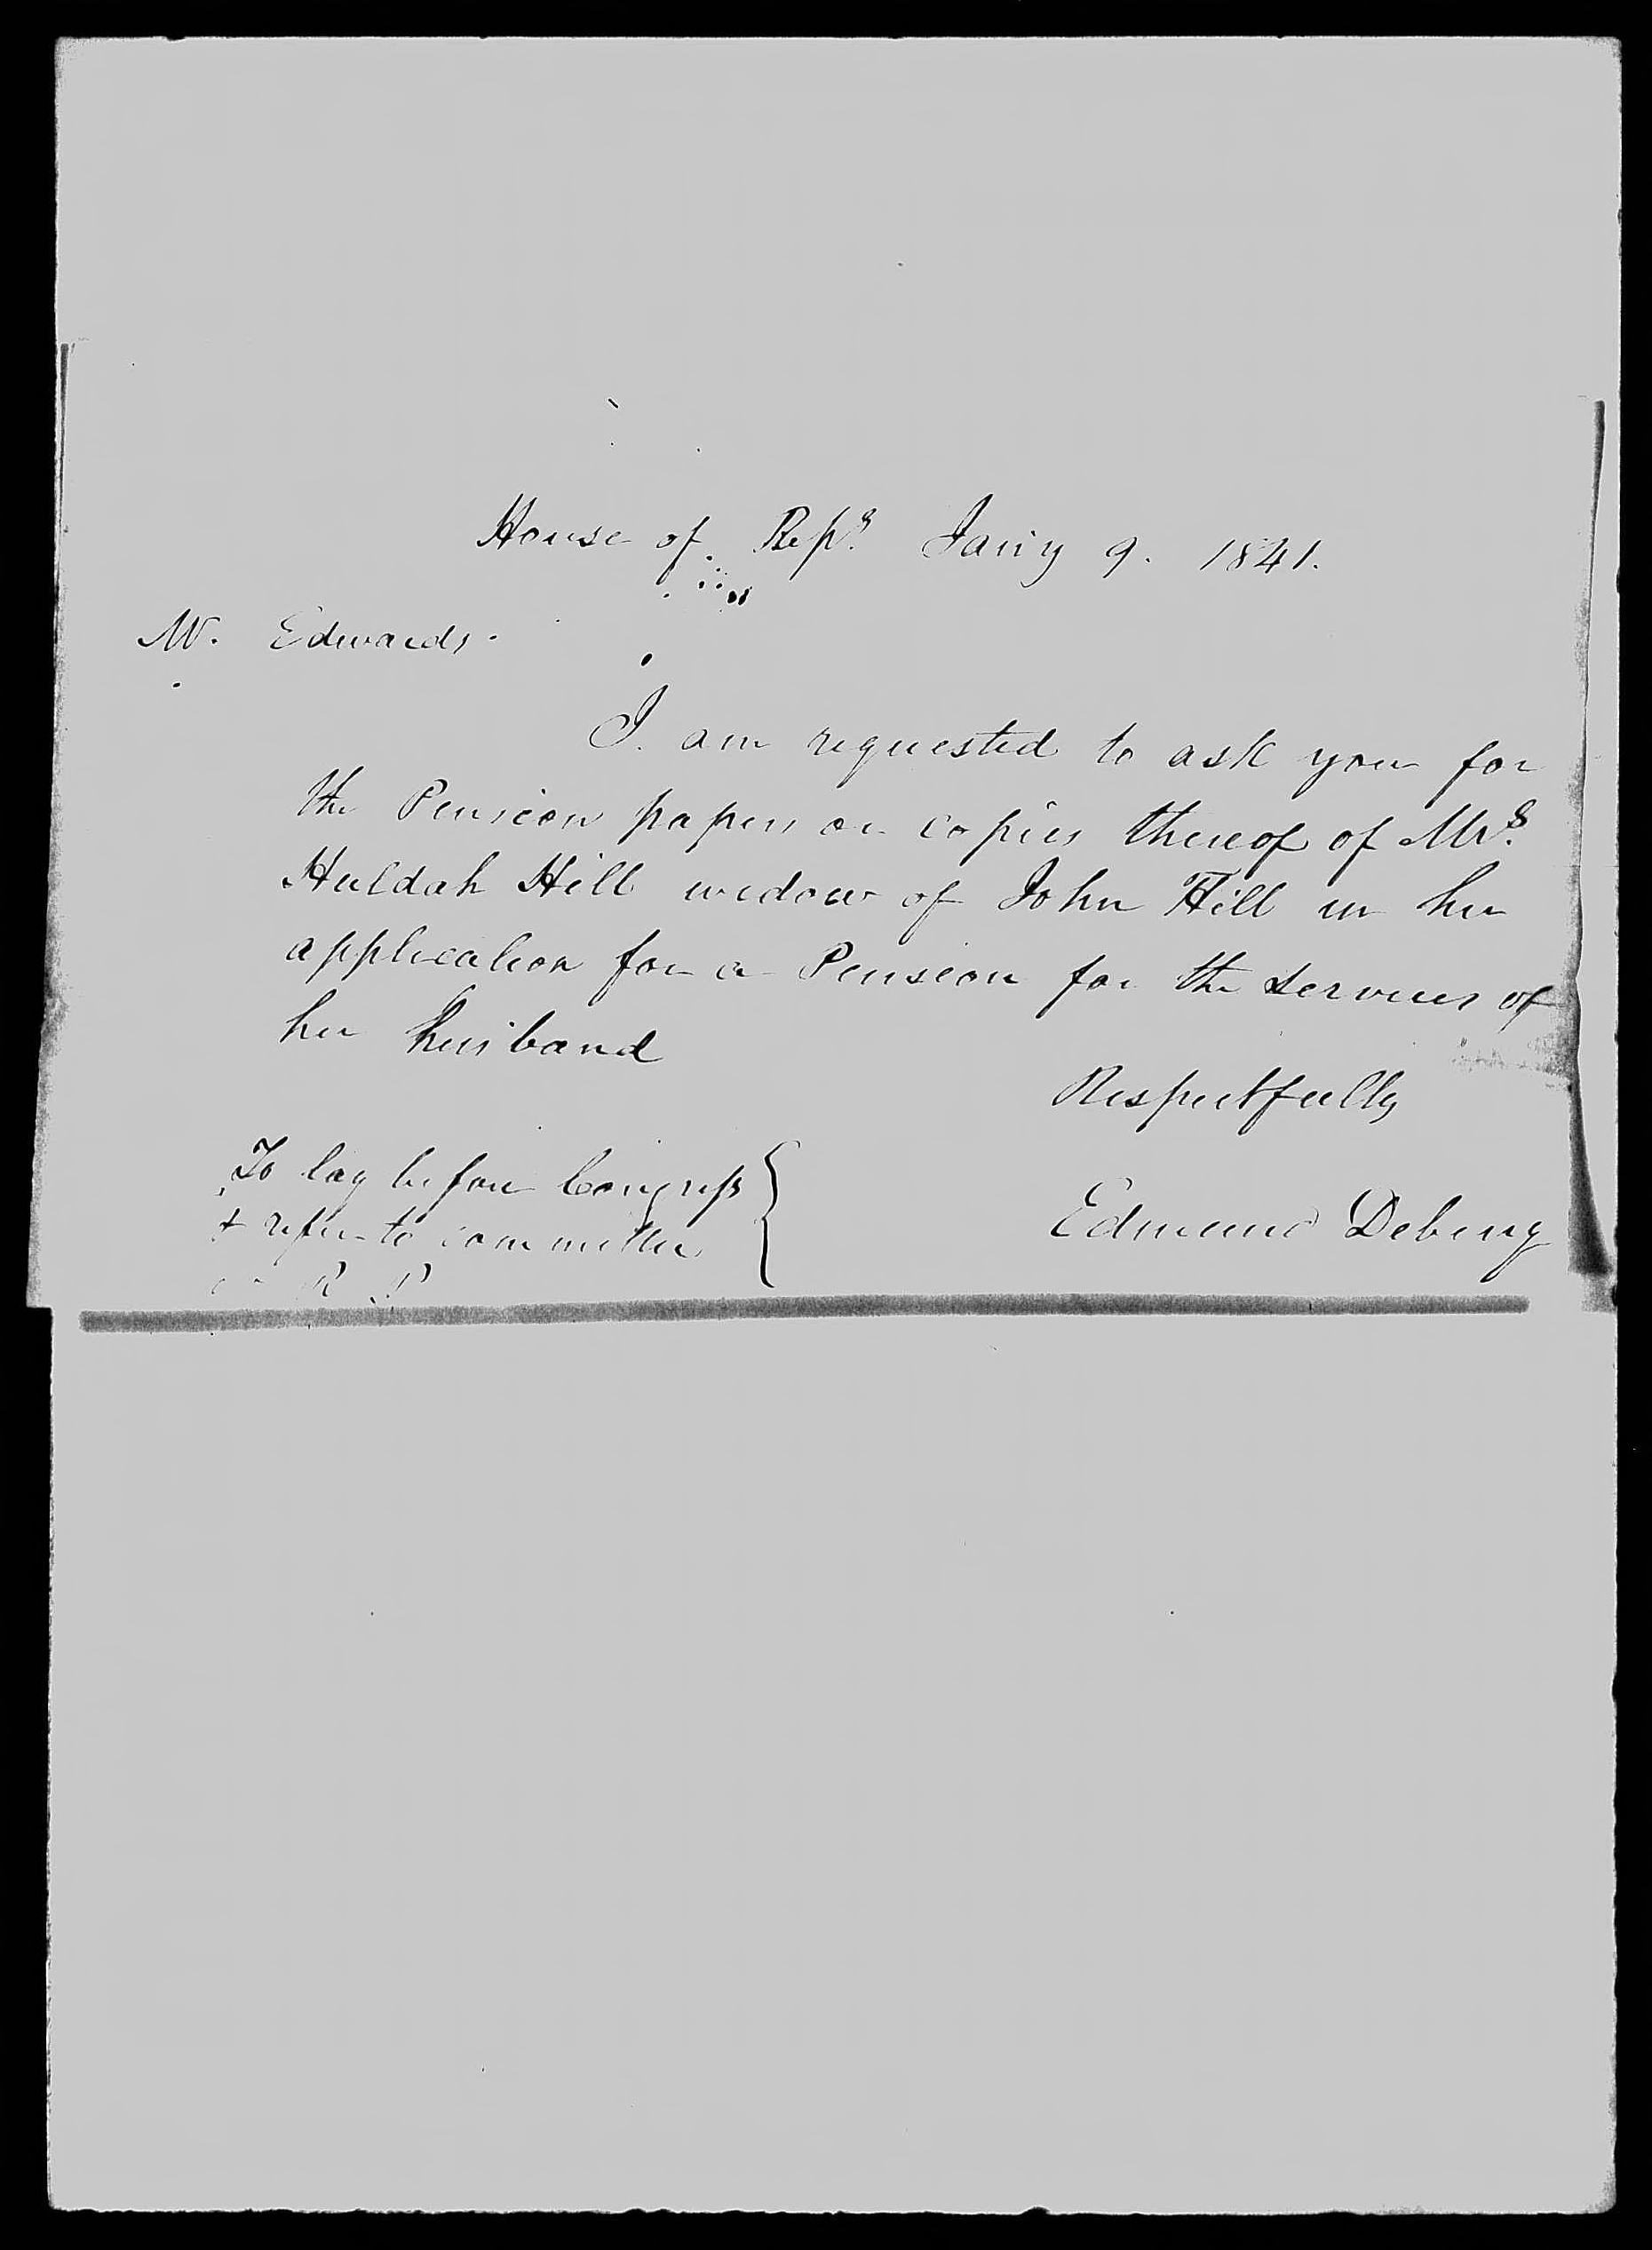 Letter from Edmund Deberry to James L. Edwards, 9 January 1841